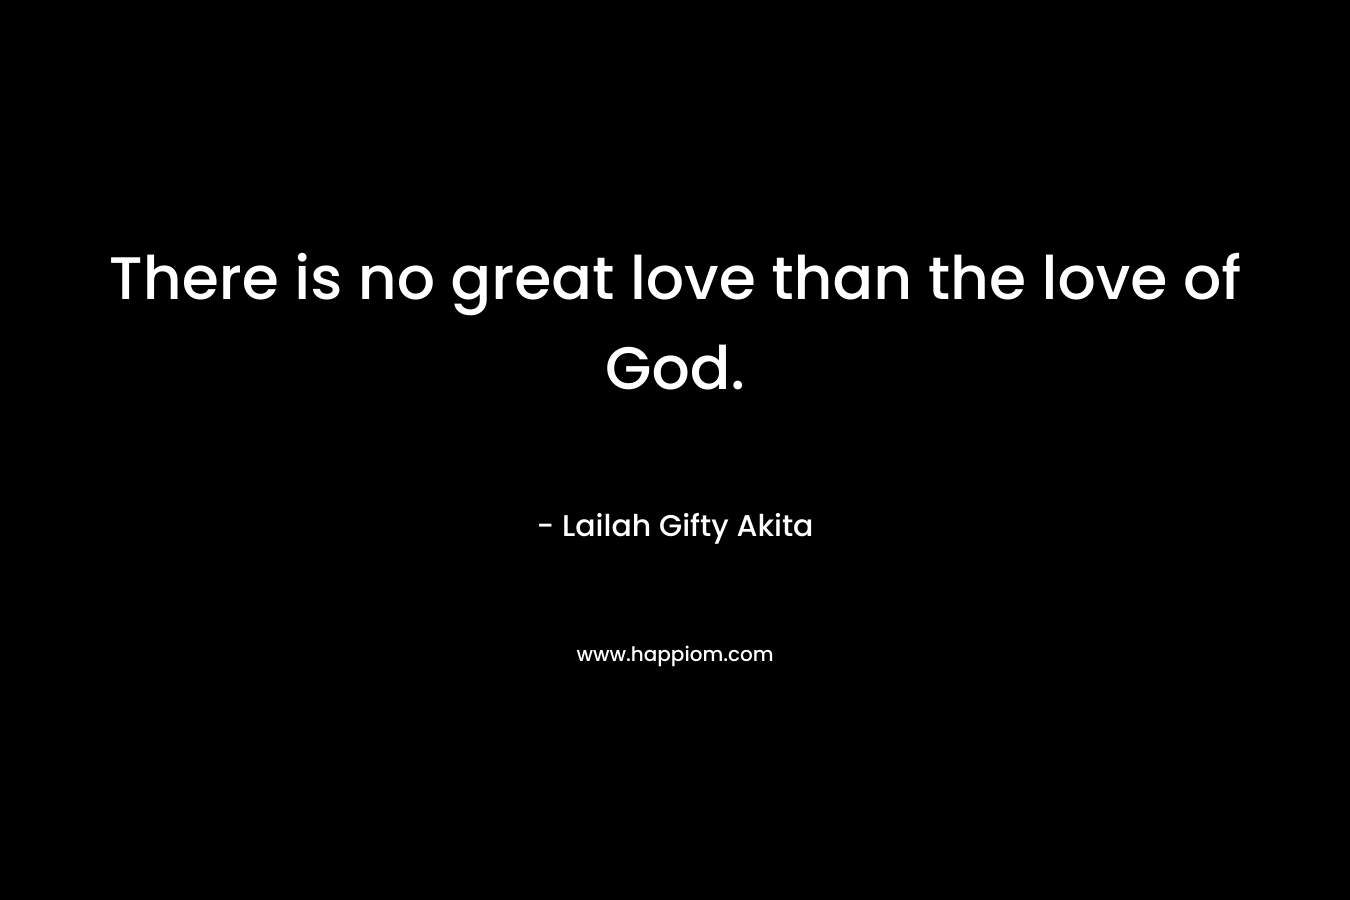 There is no great love than the love of God.